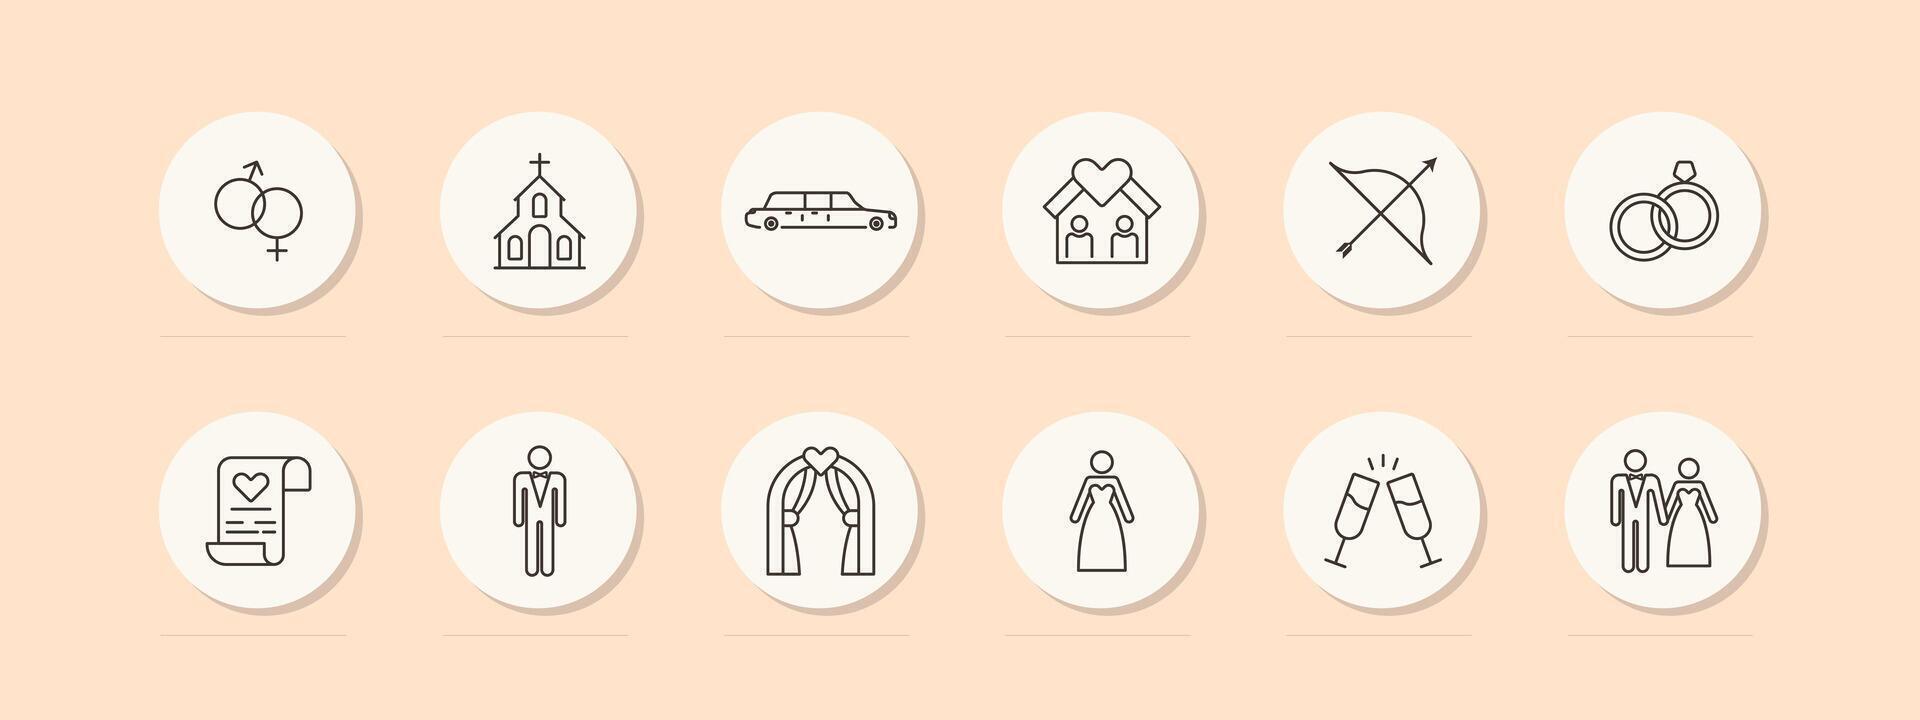 Wedding icon set. Document, wine, sex, glasses, church, heart, wife, wedding dress and suit, man, groom, house, limousine, bow, marriage certificate, altar. Marriage concept. line icon. vector